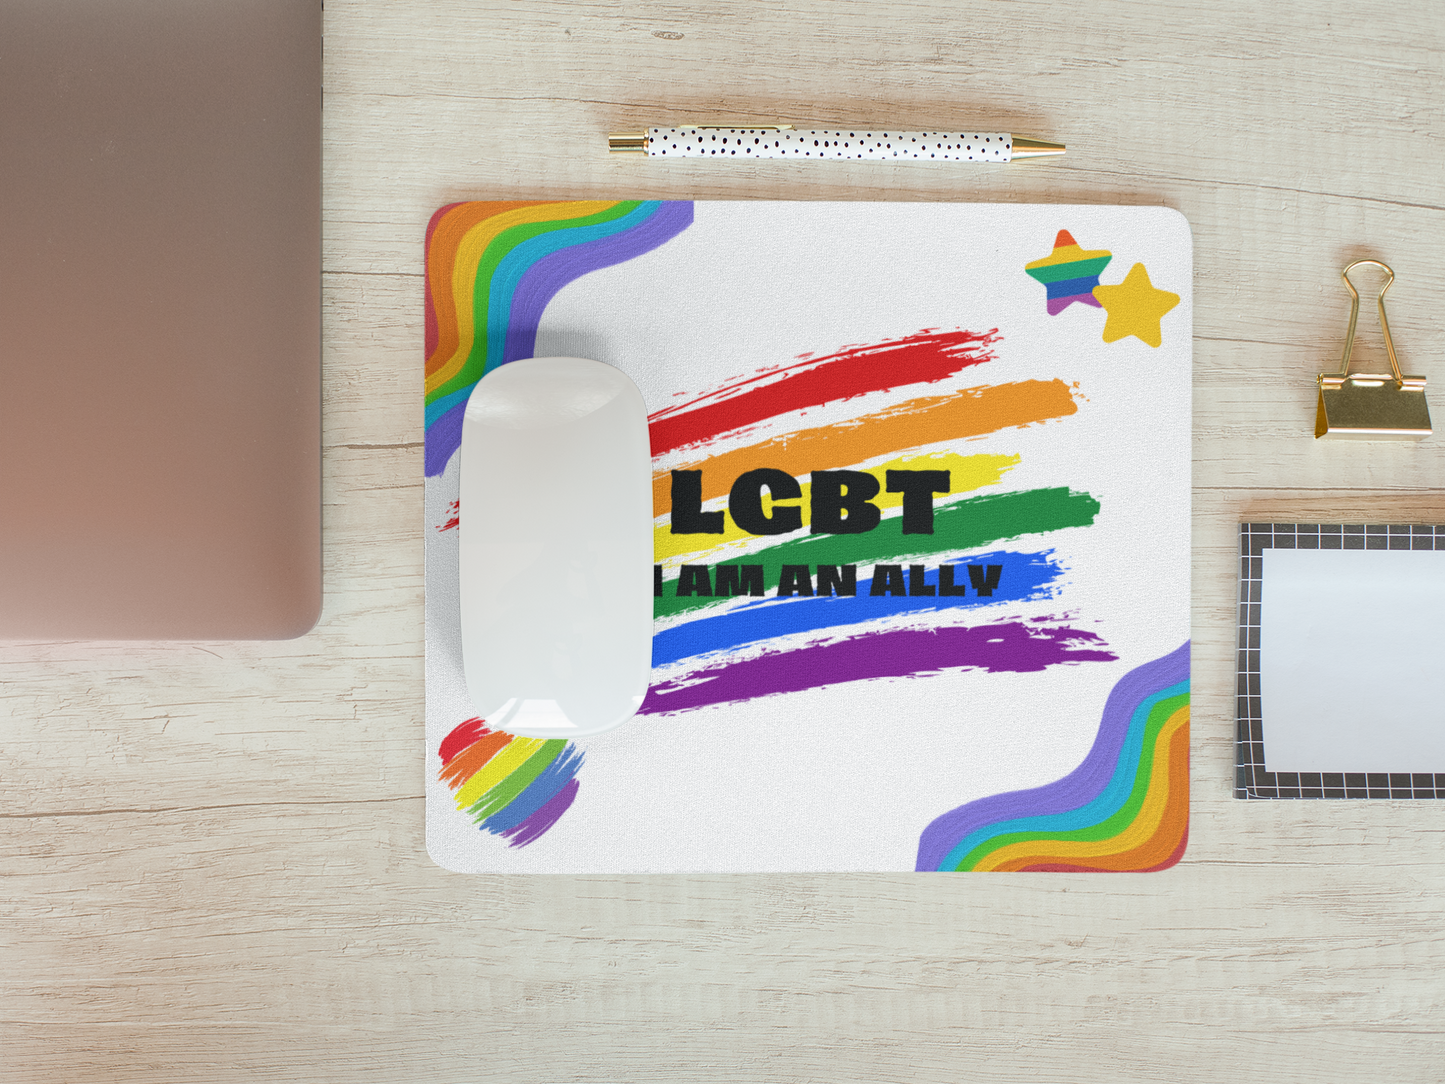 LGBT "I Am An Ally" Mousepad For Office | Gaming | School. Mousepad for Laptop and Desktop